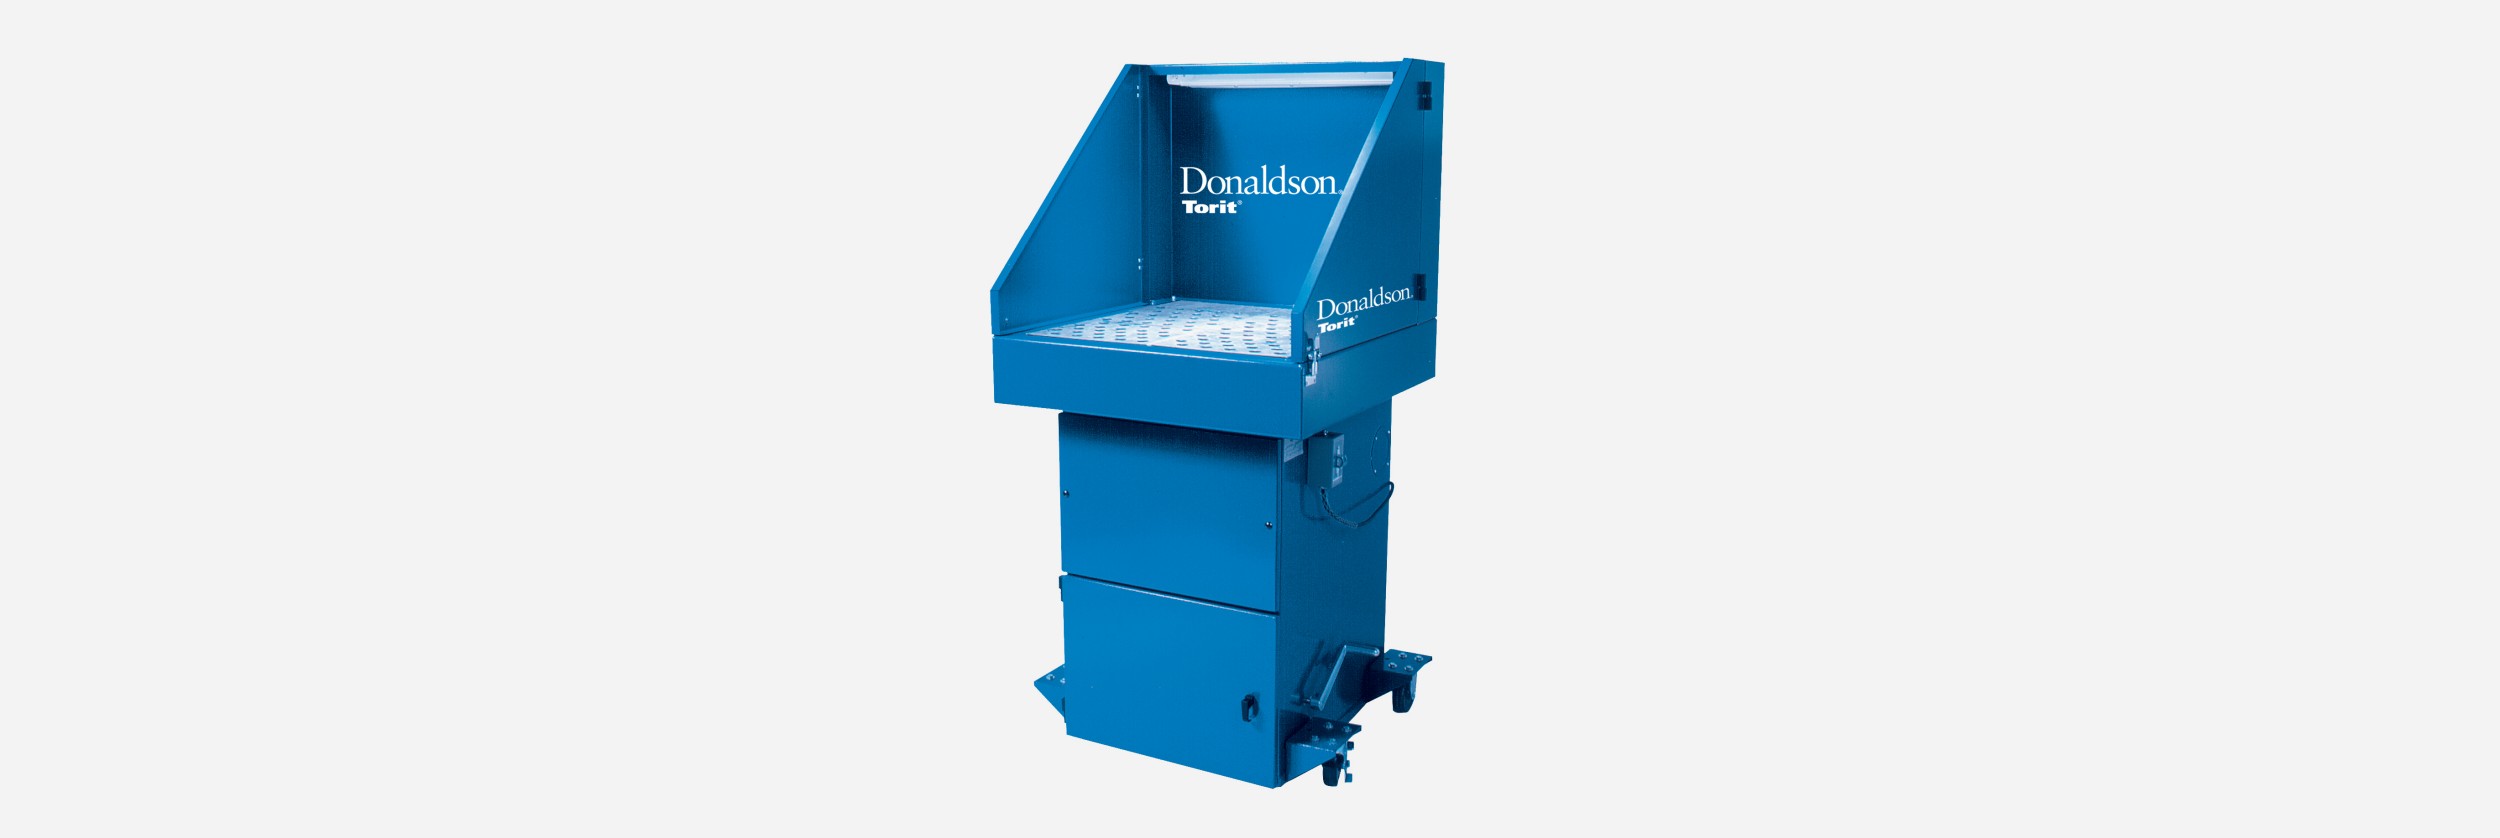 Donaldson Downdraft Workbench DB-800 dust collector hero image | AIRPLUS Industrial